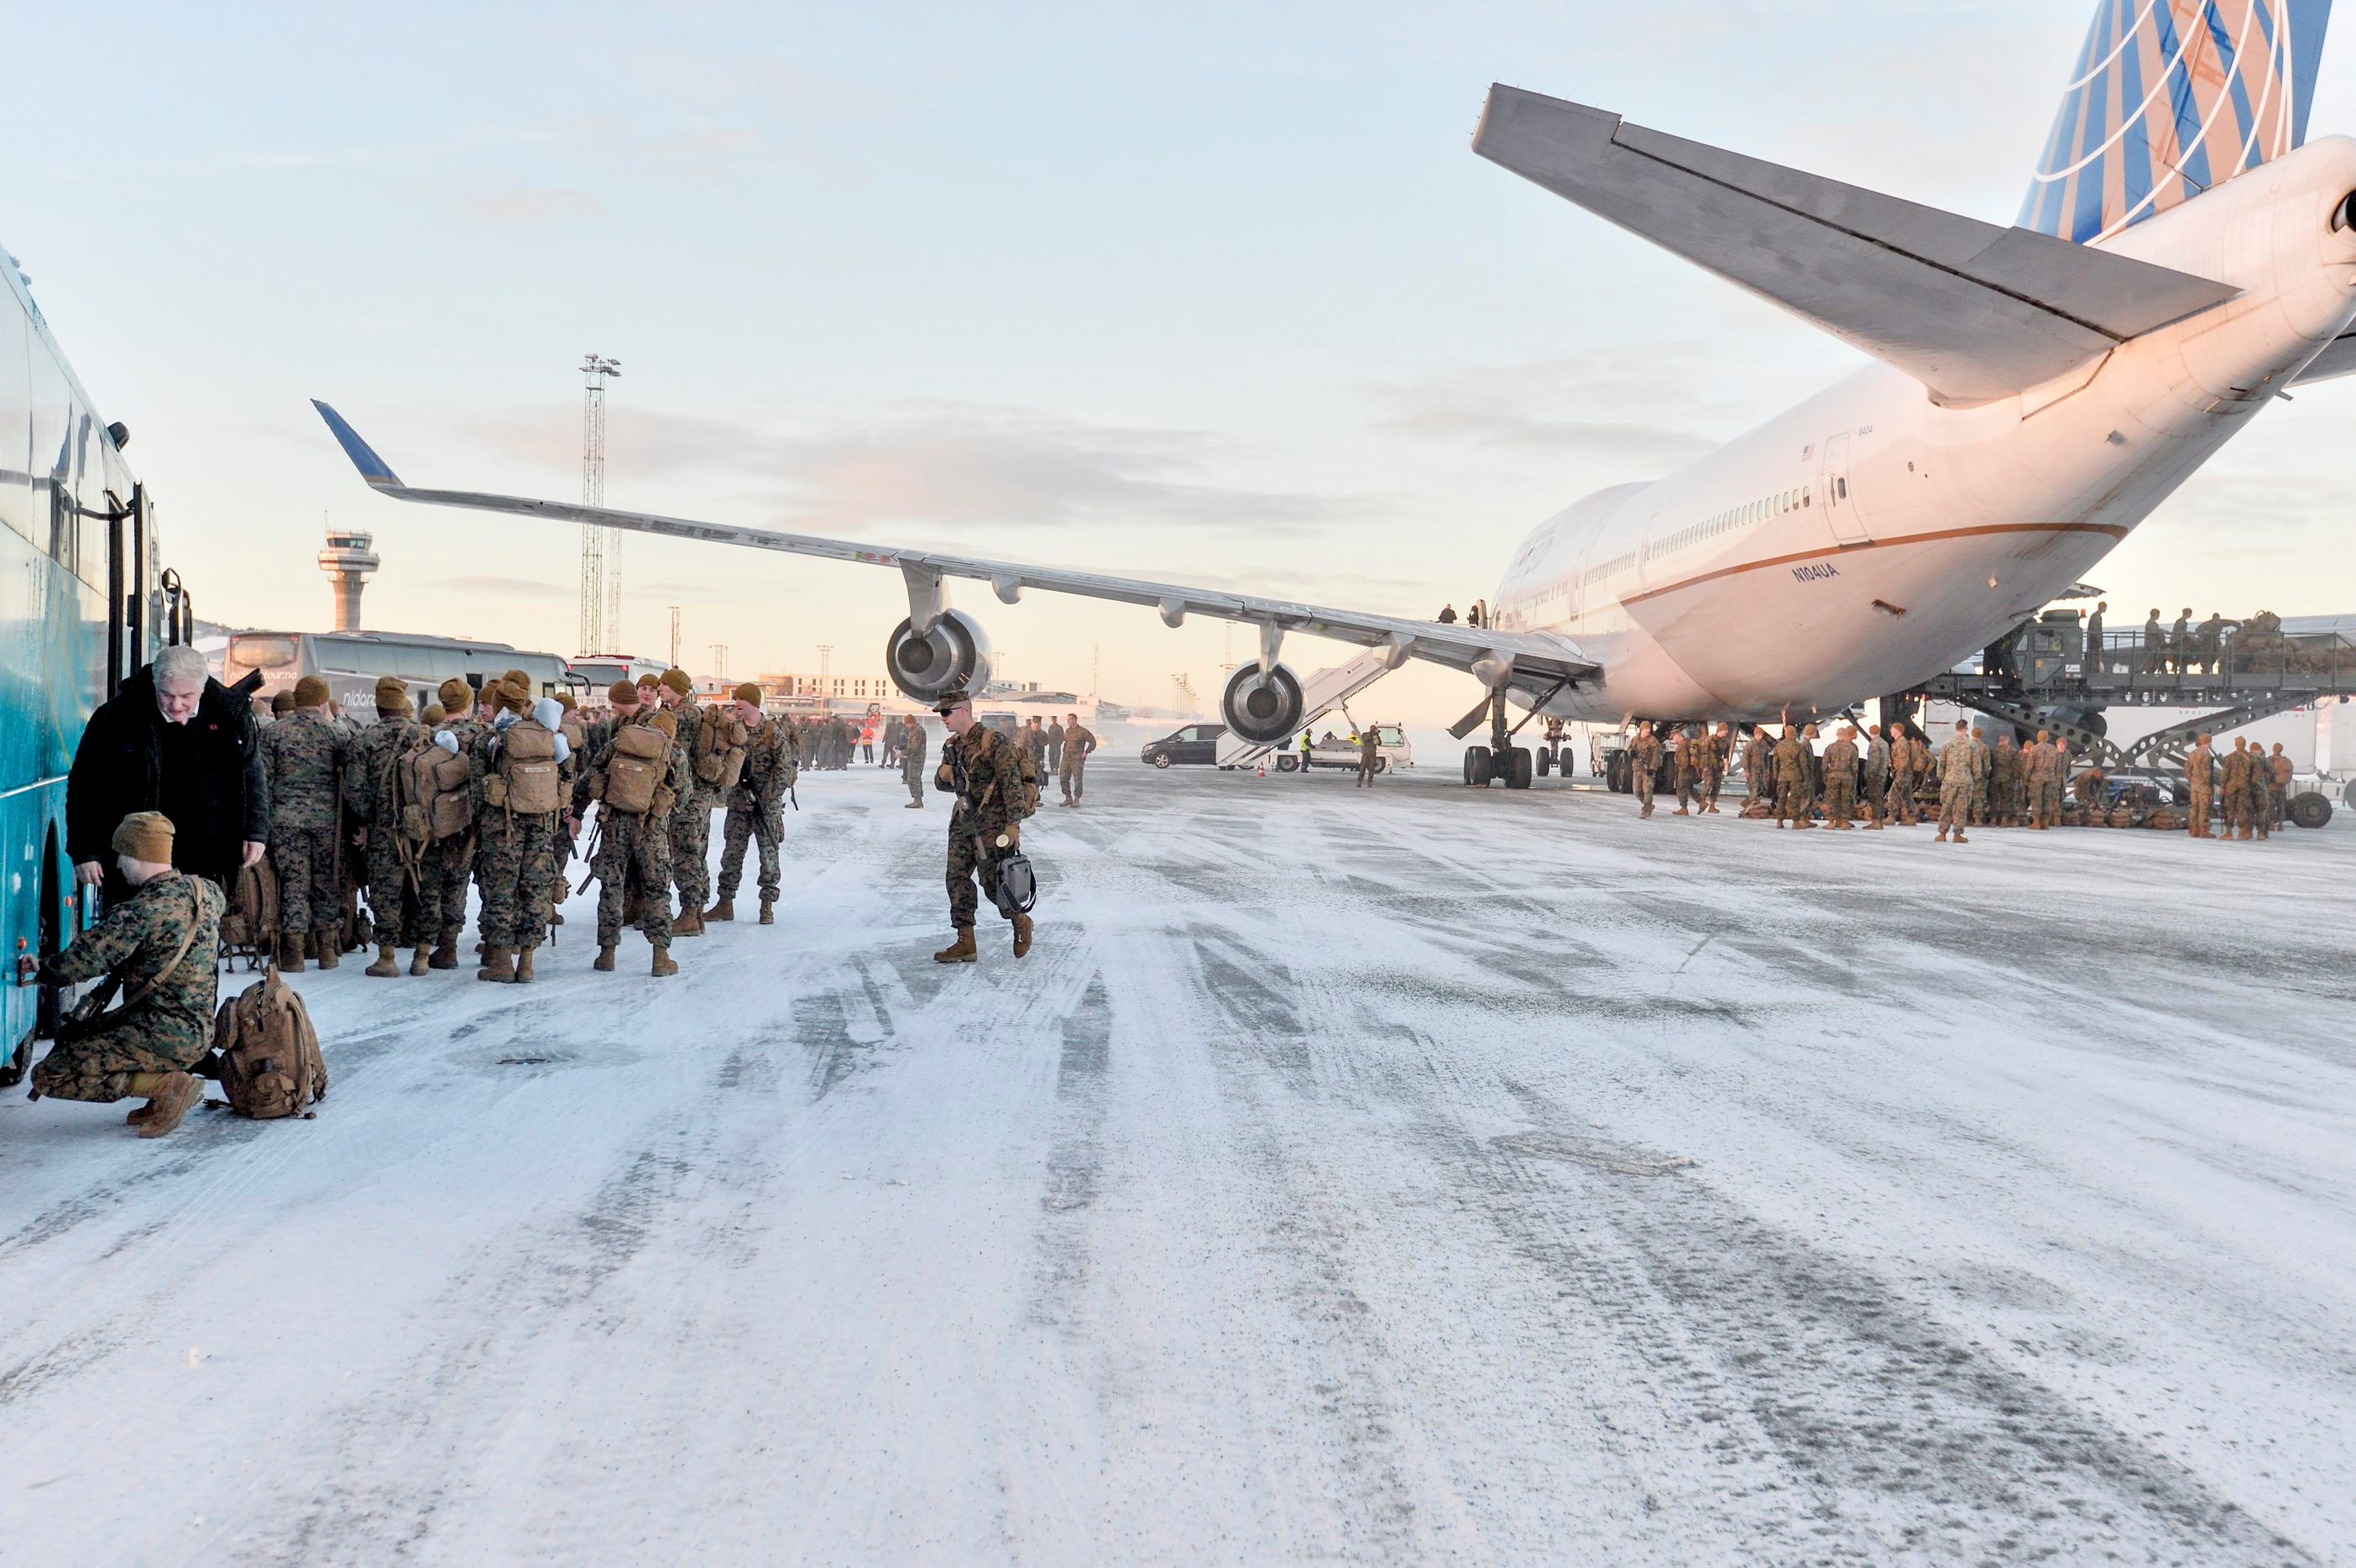 A Boeing 747 with some 300 U.S. Marines, who are to attend a six-month training to learn about winter warfare, lands in Stjordal, Norway January 16, 2017. NTB Scanpix/Ned Alley/via REUTERS